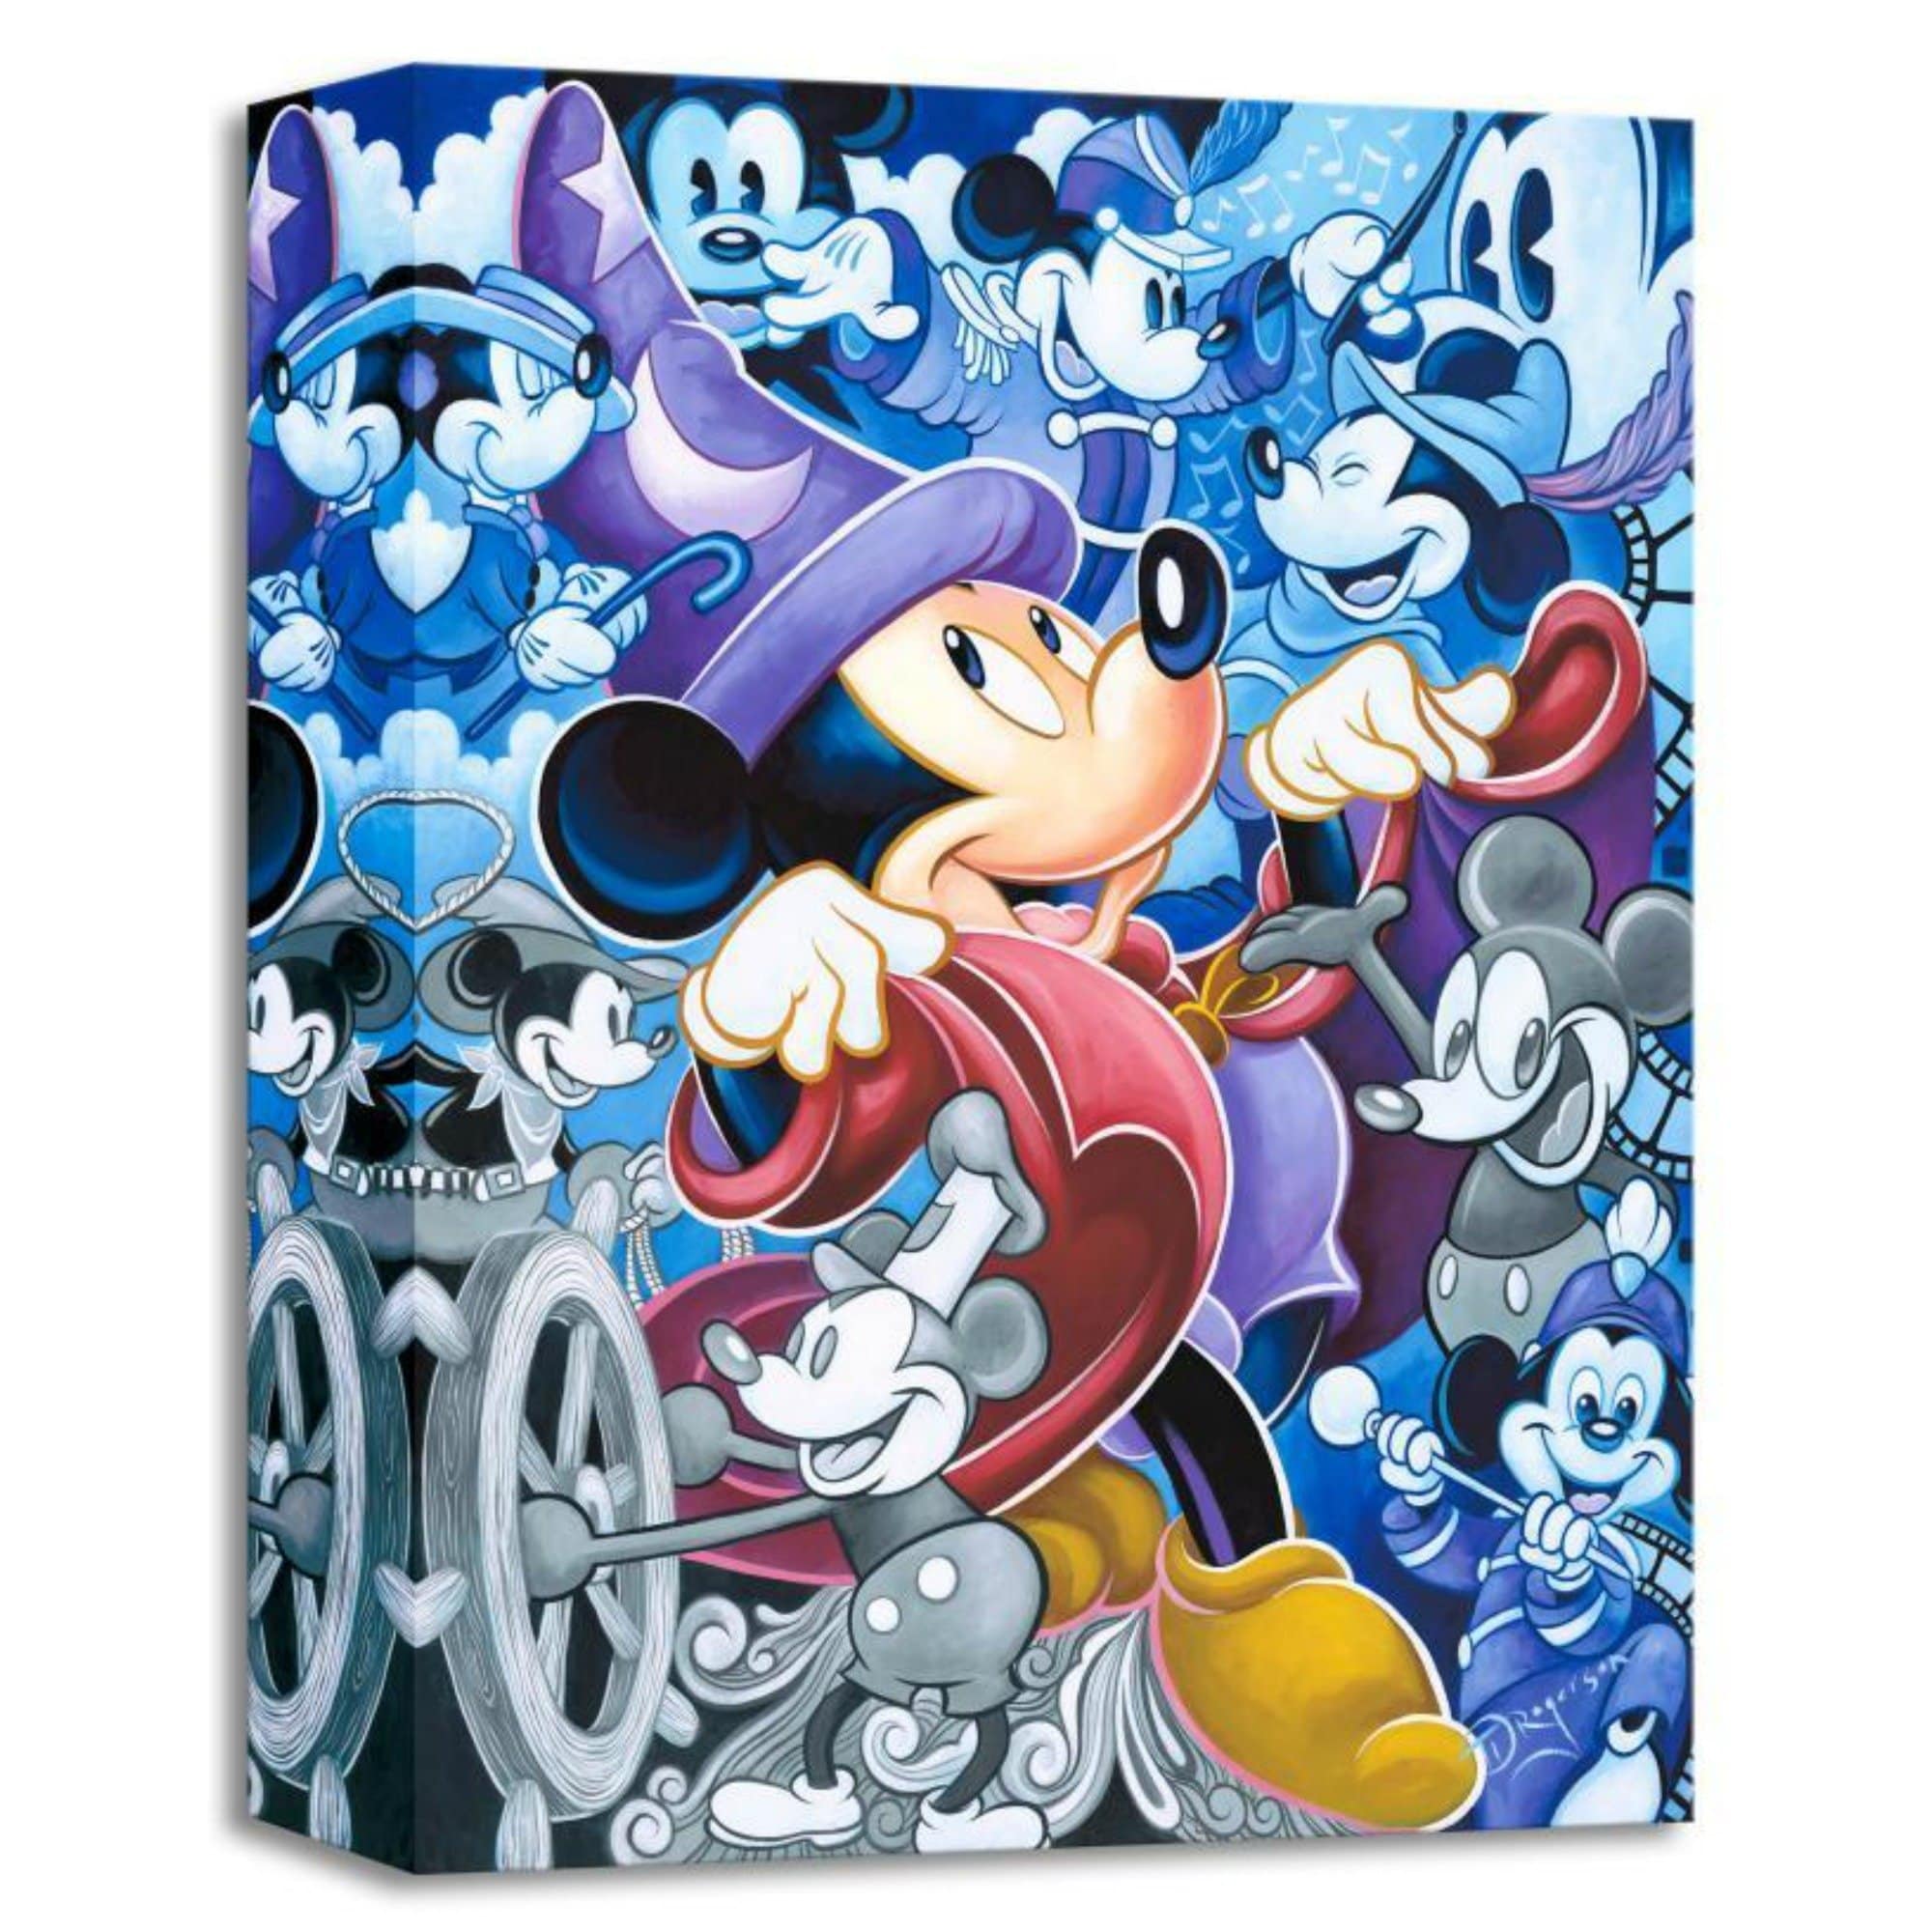 Celebrate the Mouse by Tim Rogerson Features Mickey the Sorcerer his most famous character role, along with the many other characters Mickey has played throughout the years.